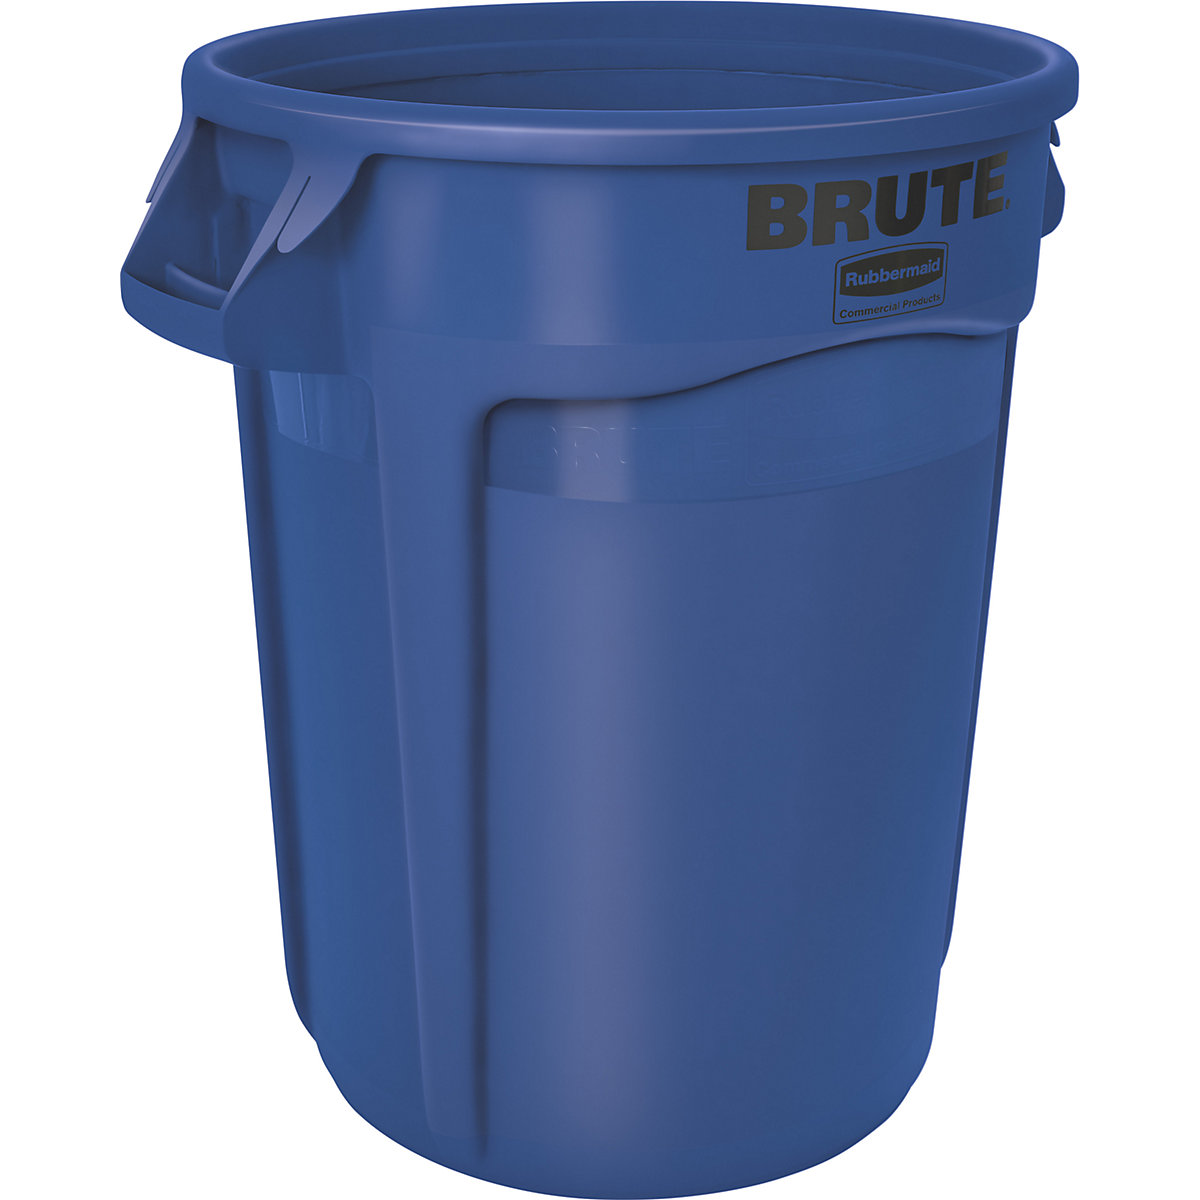 BRUTE® universal container, round – Rubbermaid, capacity 121 l, blue-13